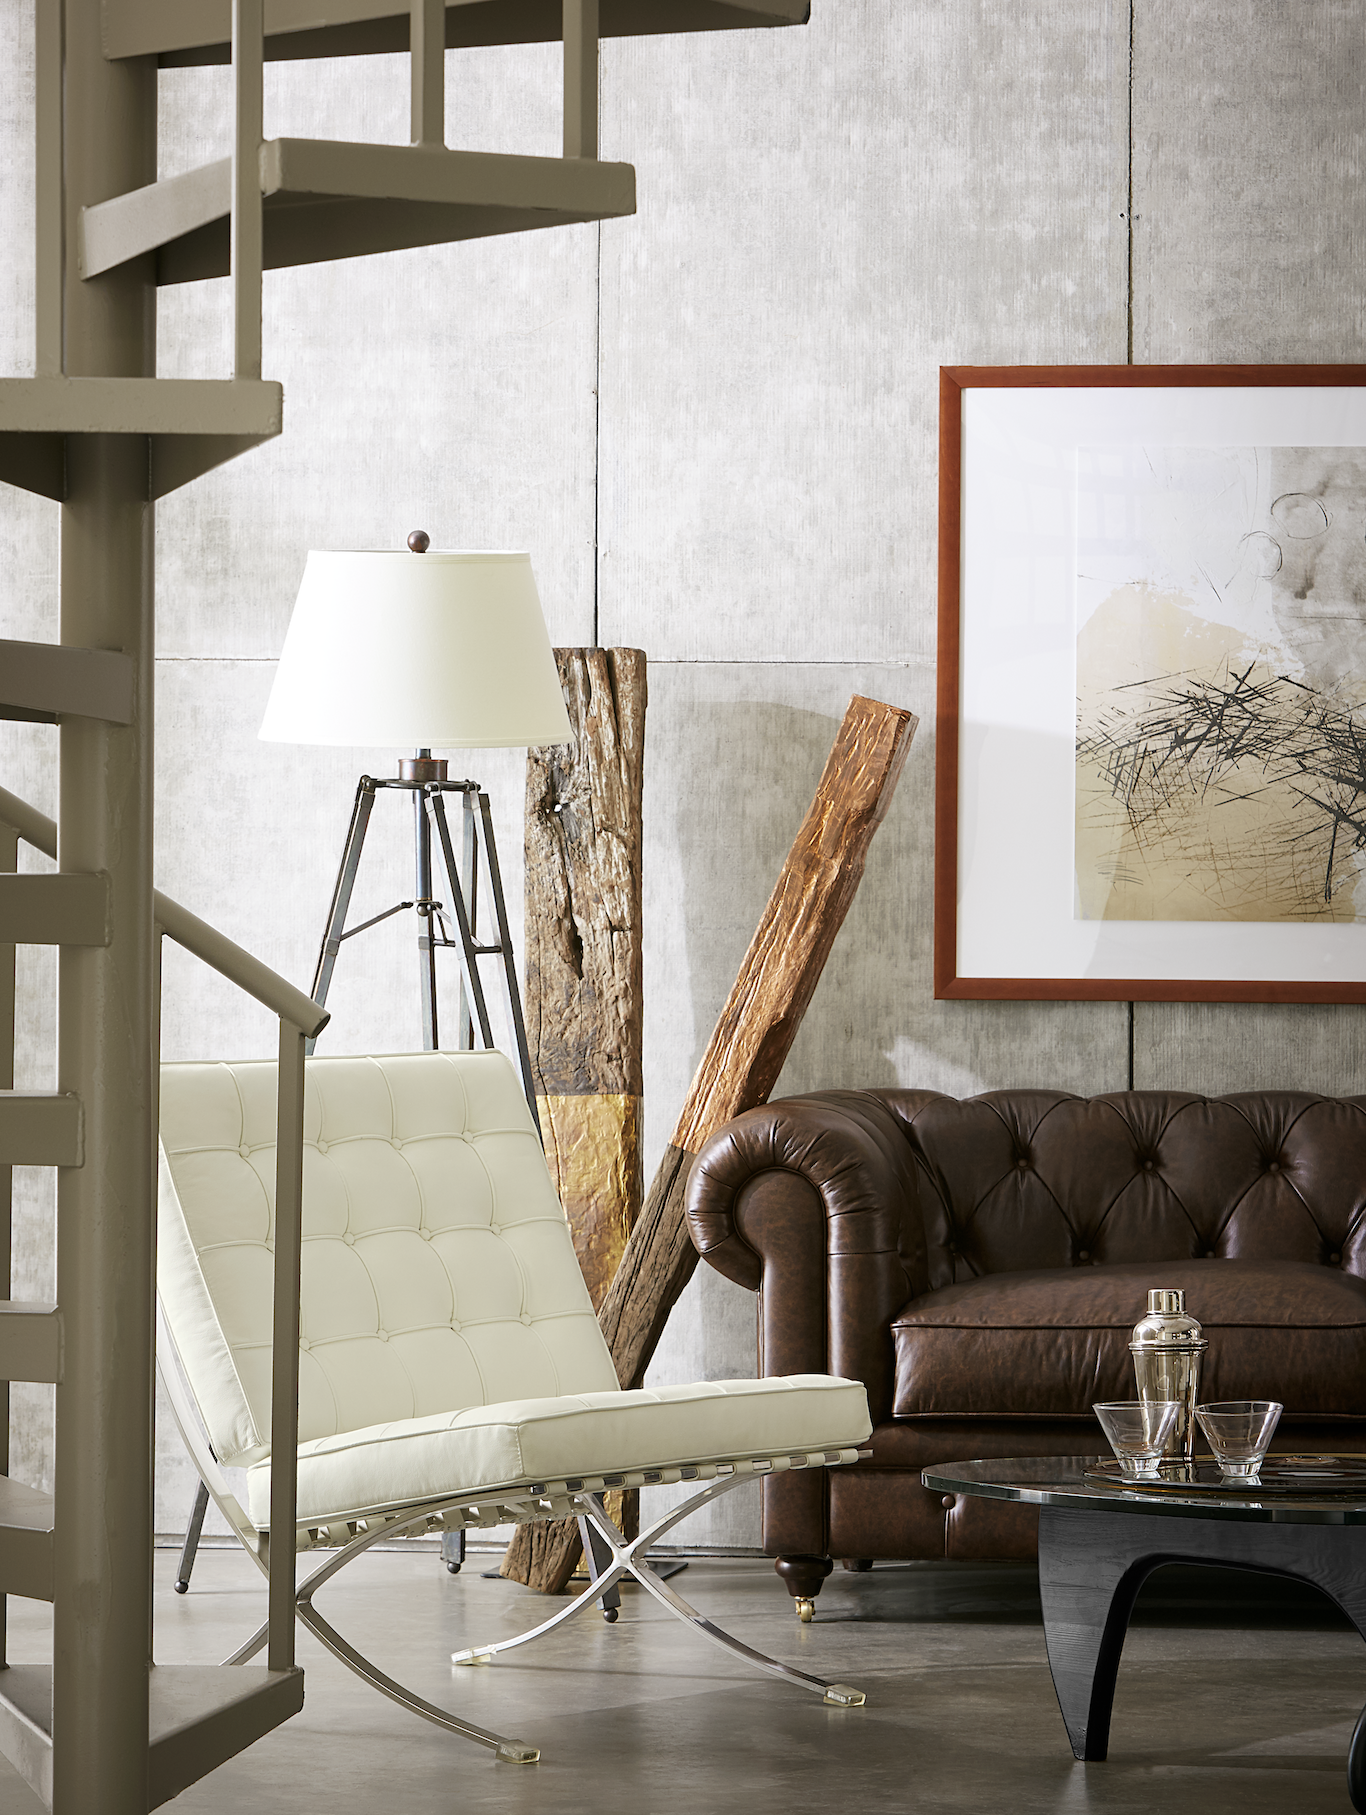 Brown sofa in a large room with cement walls, large white chair, and modern art decor